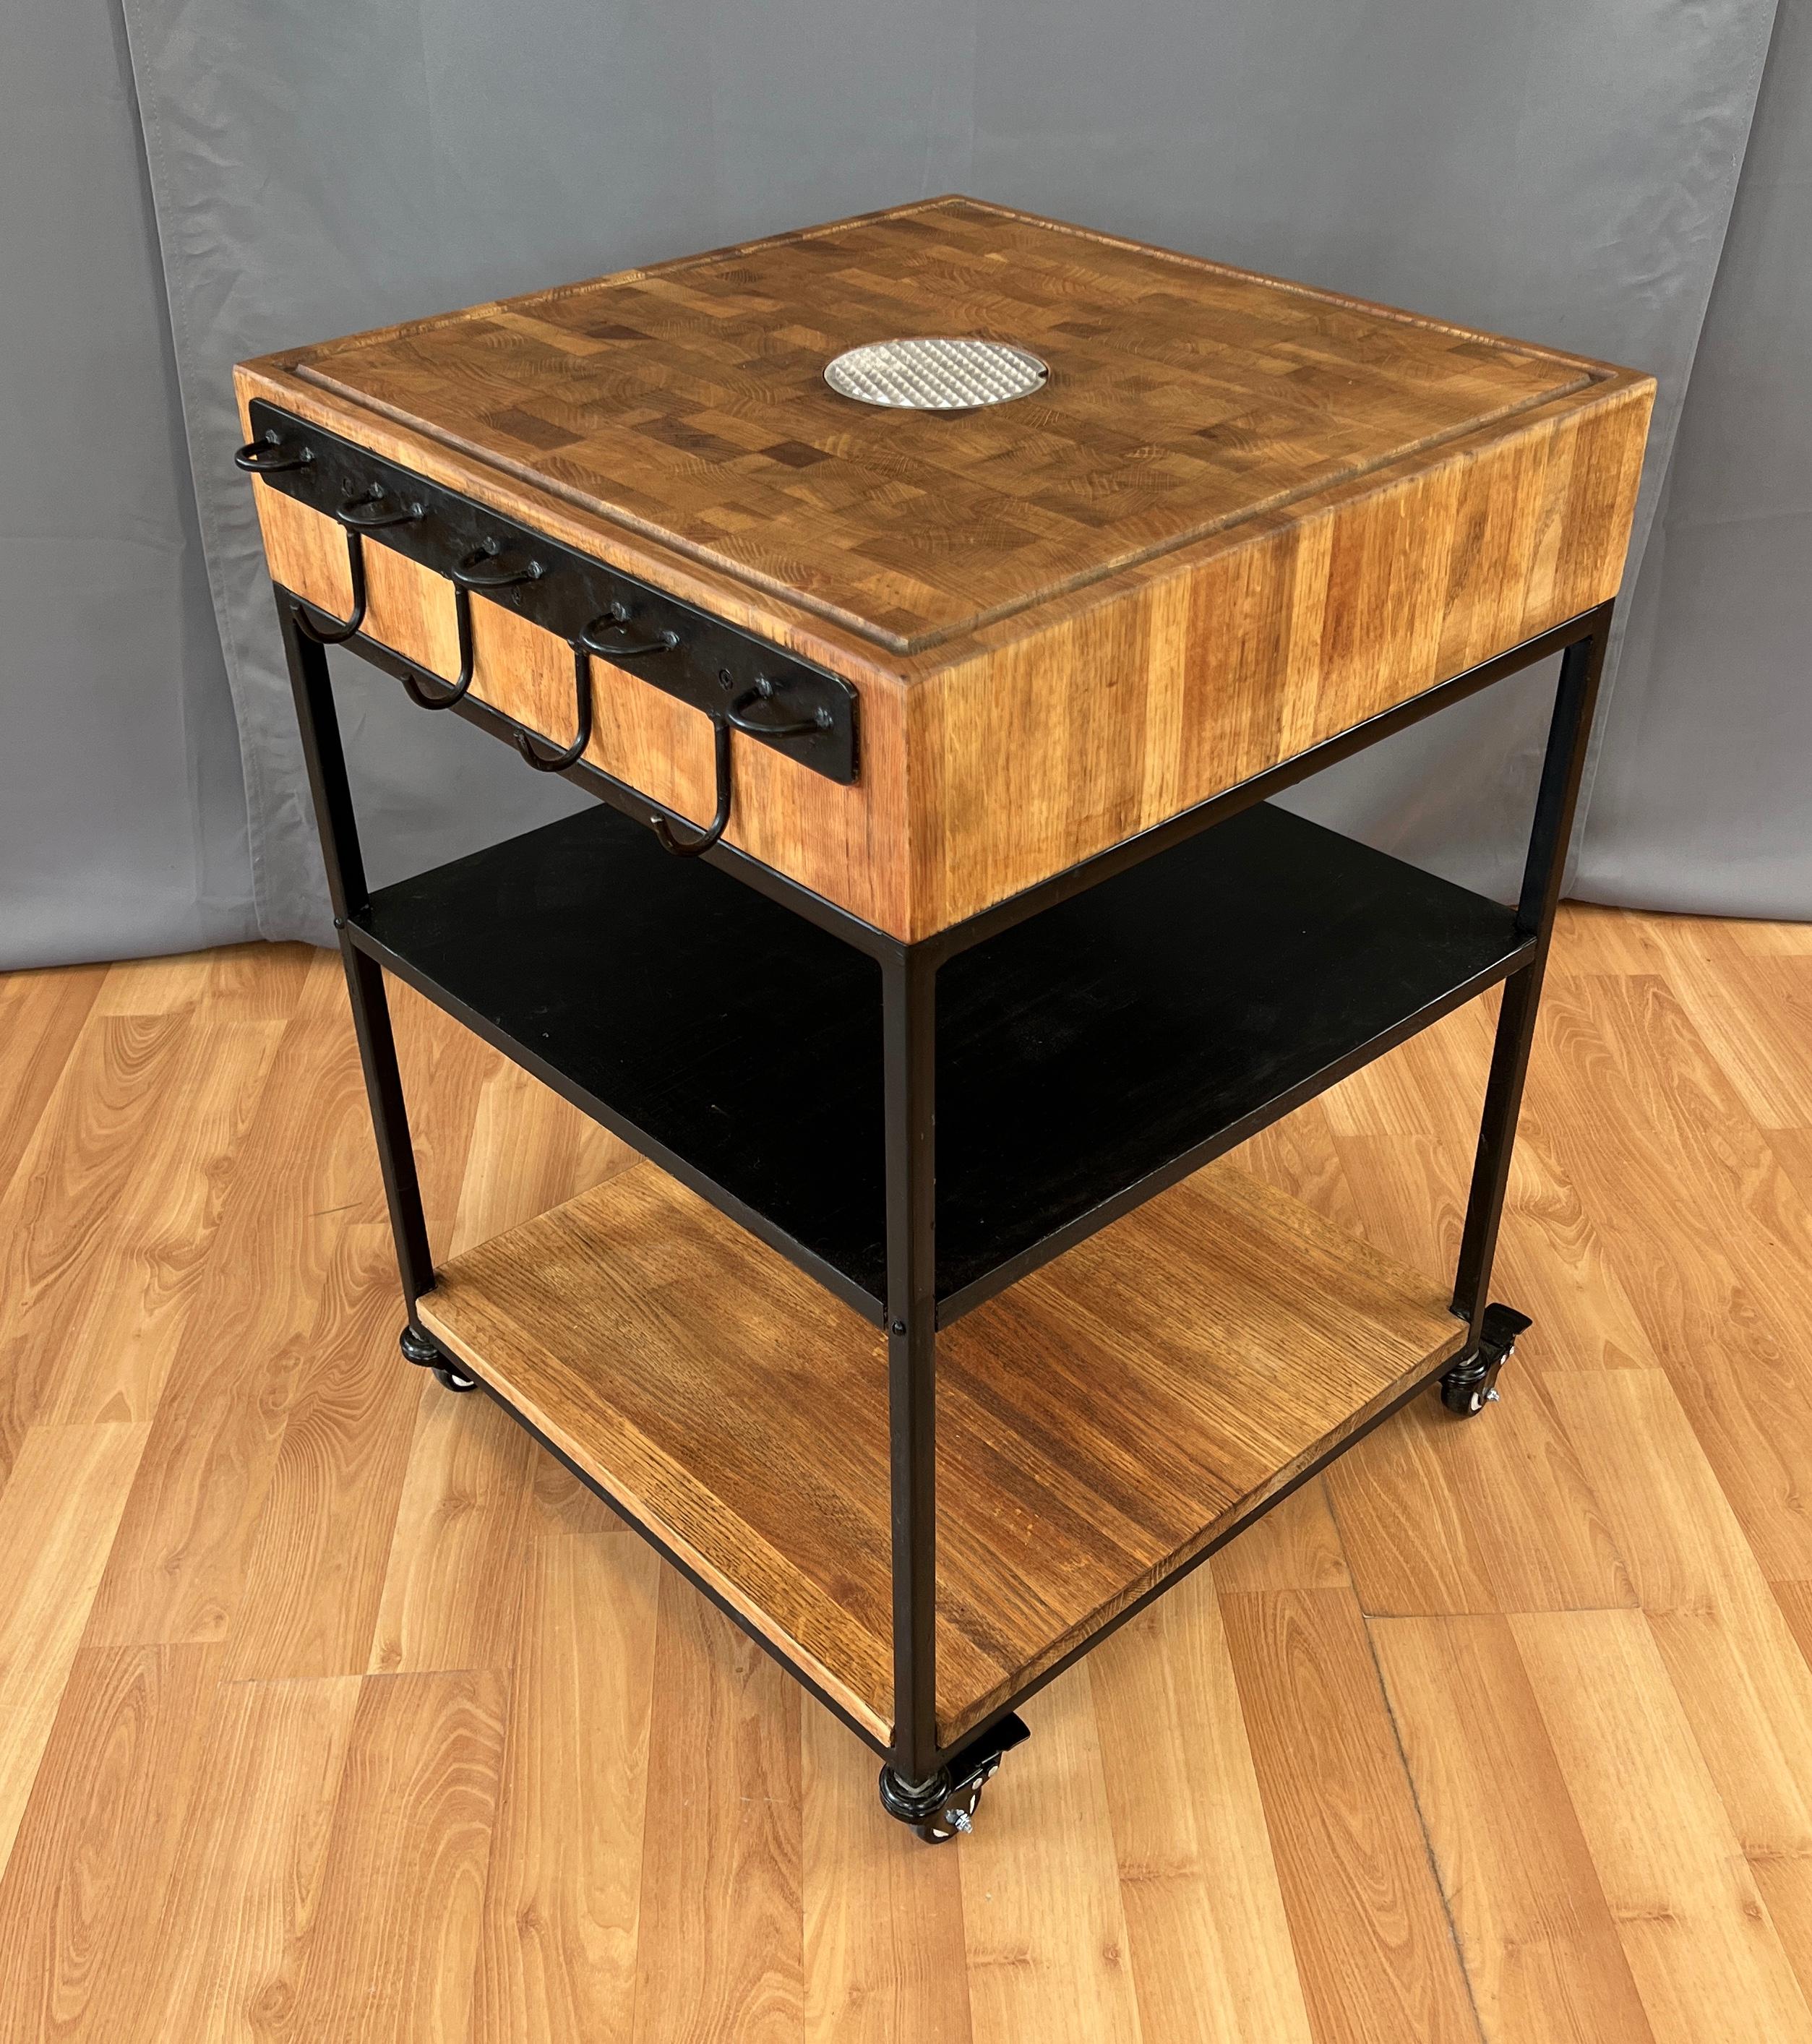 An unusual and unique Bill W. Sanders design, a large oak chopping block cart, on four wheels.
Large block of Oak, center has a round aluminum meat holder that's removable to clean underneath.
Near the outside rim has a carved groove to catch the